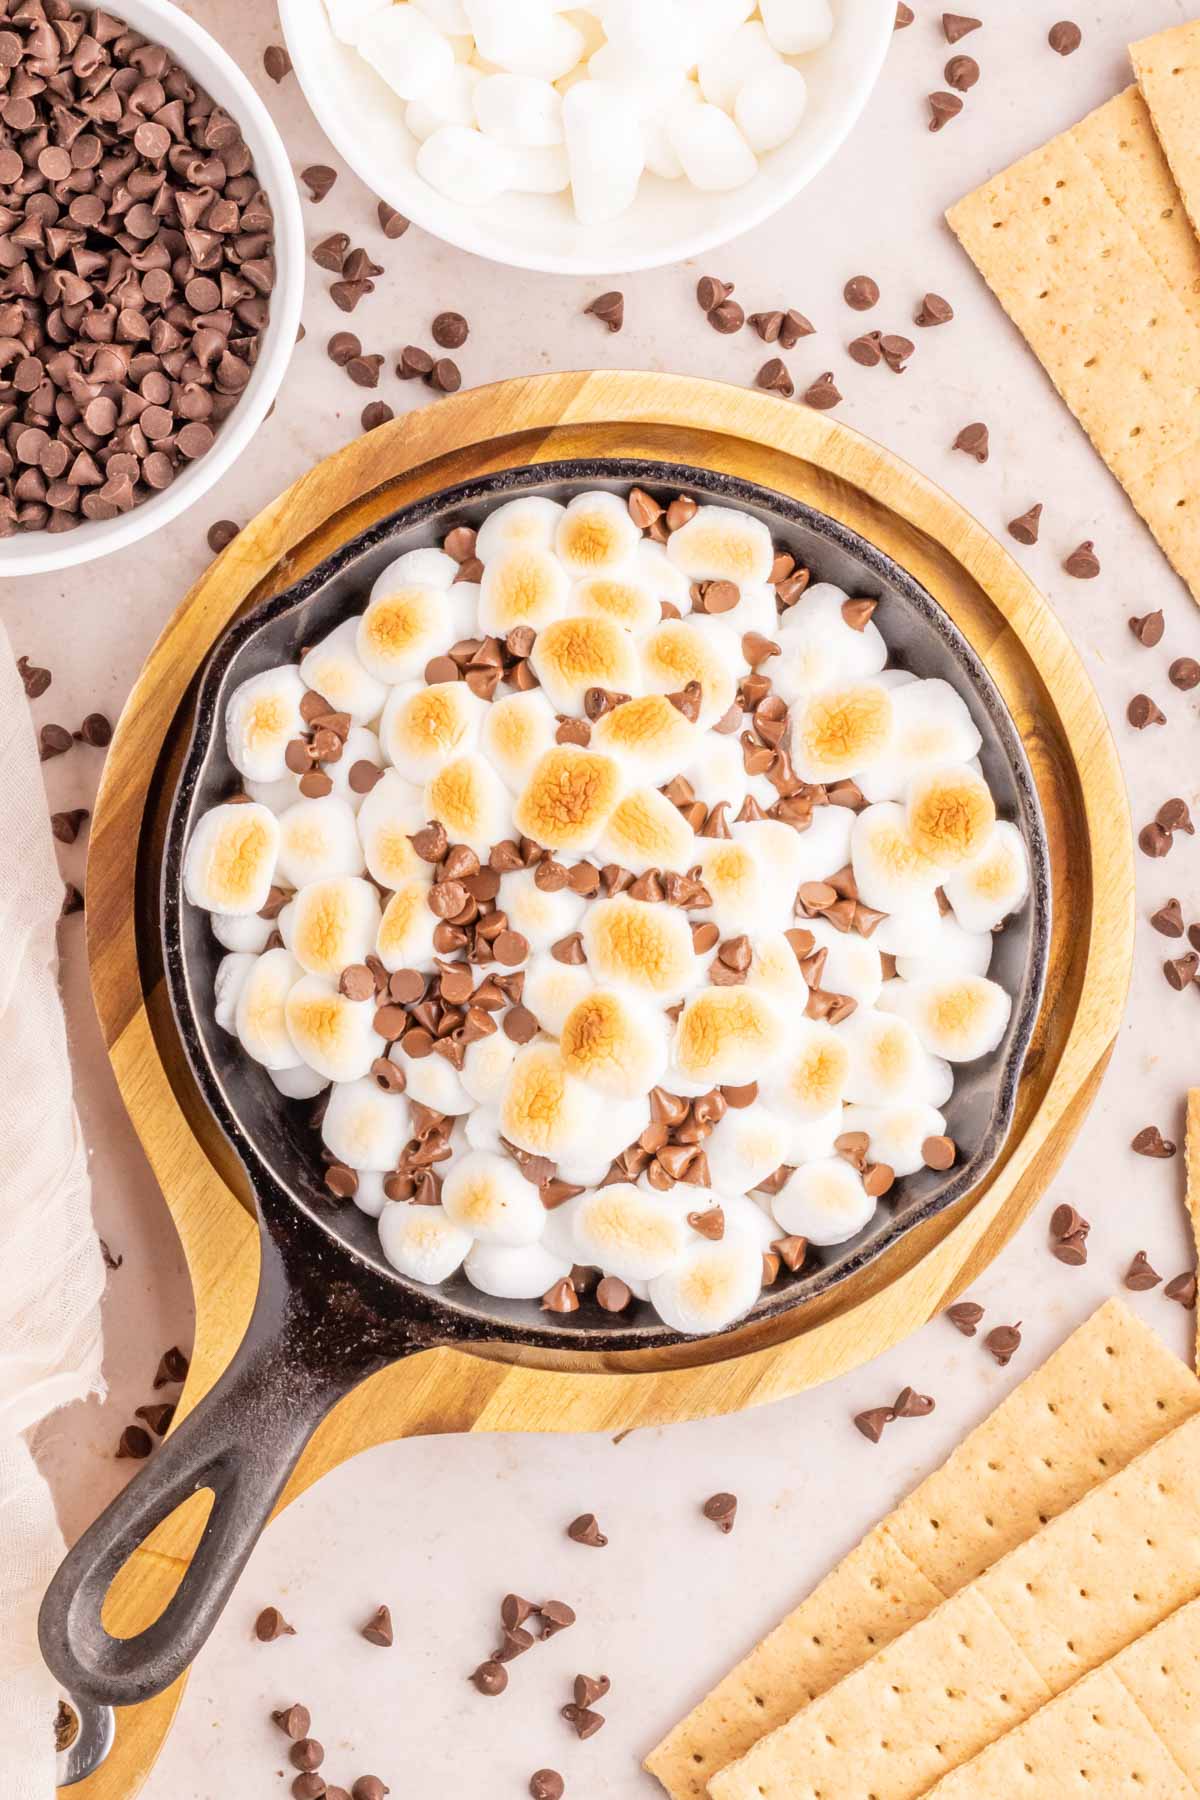 An overhead image of a cast iron skillet filled with a gooey s'mores dip.